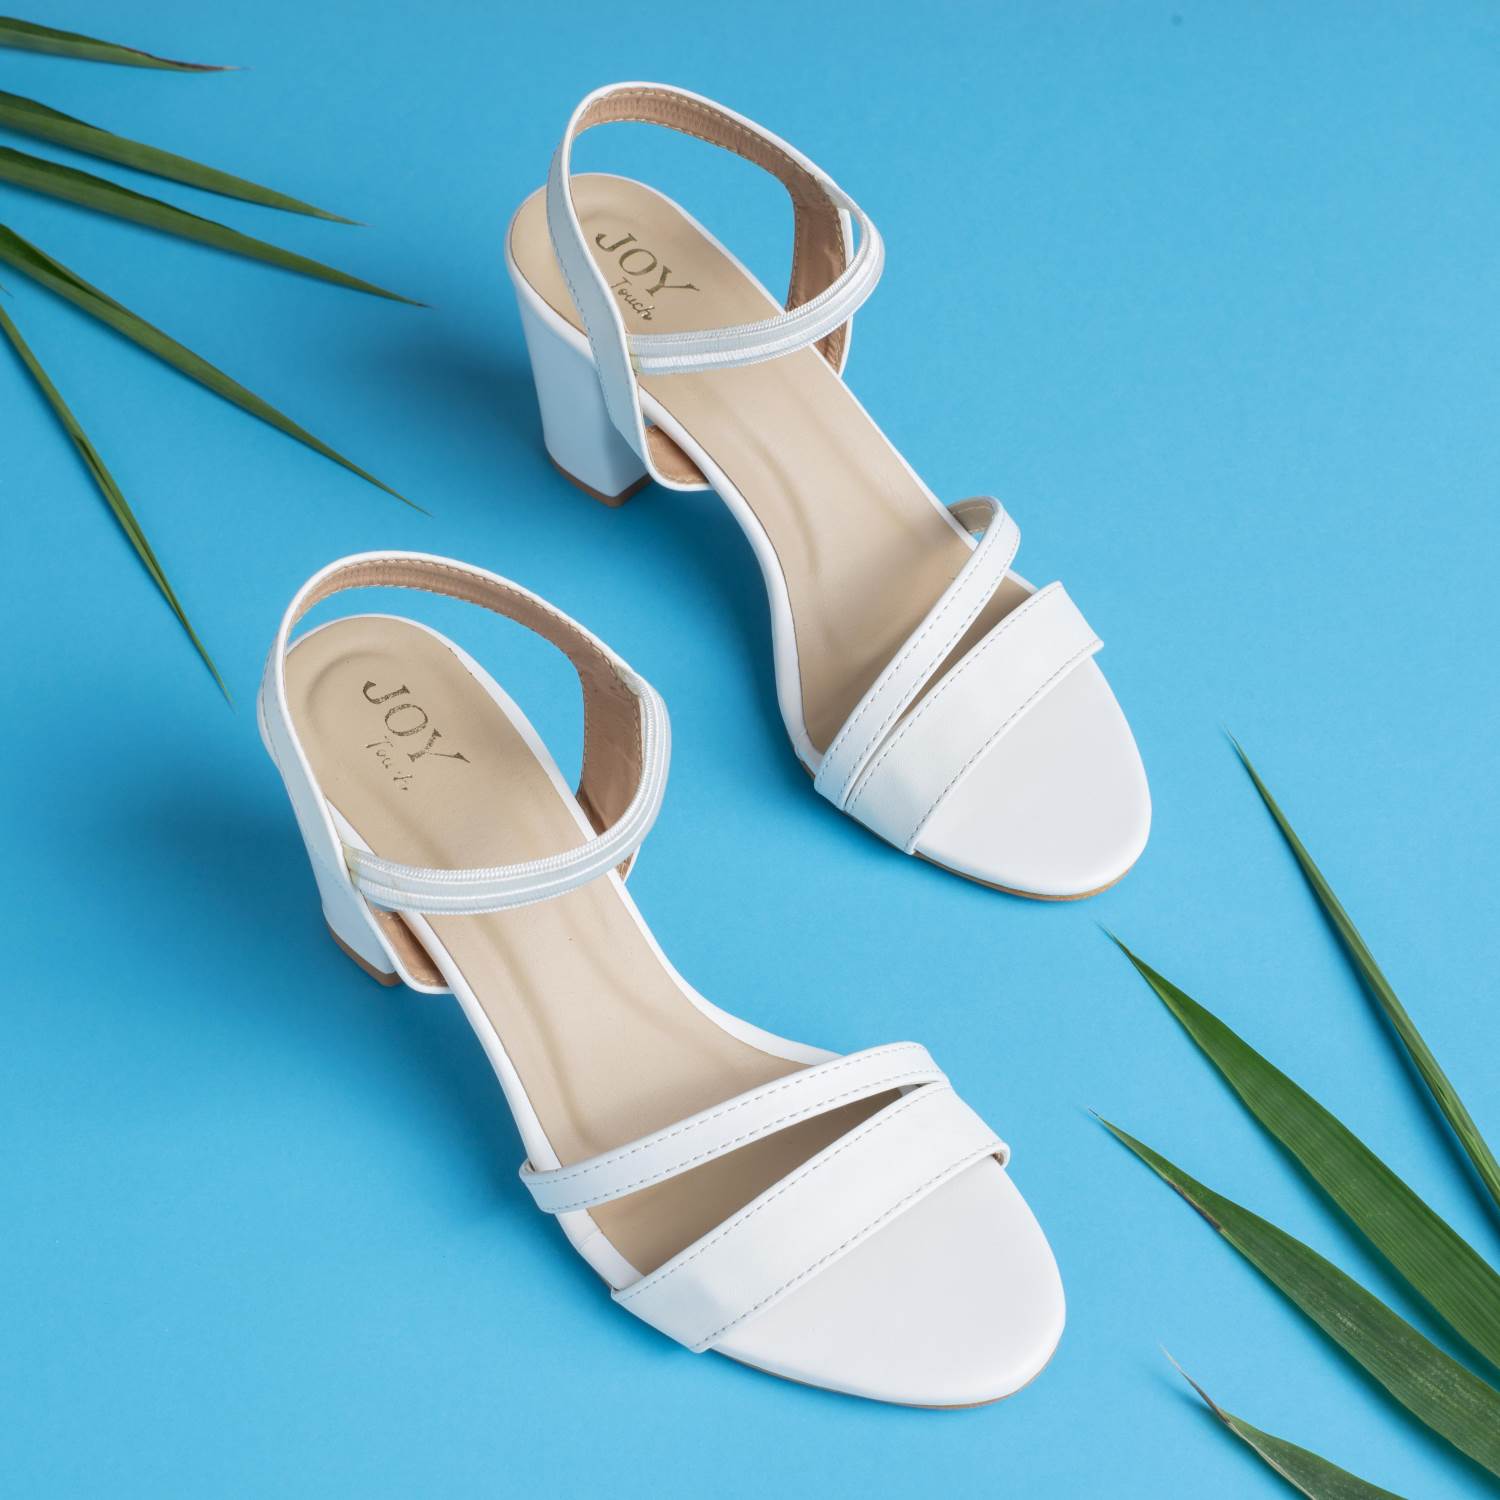 Sandals Latest Fashion Womens Sandals Patent Leather Color Matching Thick  High Heels Ankle Strap Water Platform High Heels Sandals Luxury From  Youyig8, $114.22 | DHgate.Com